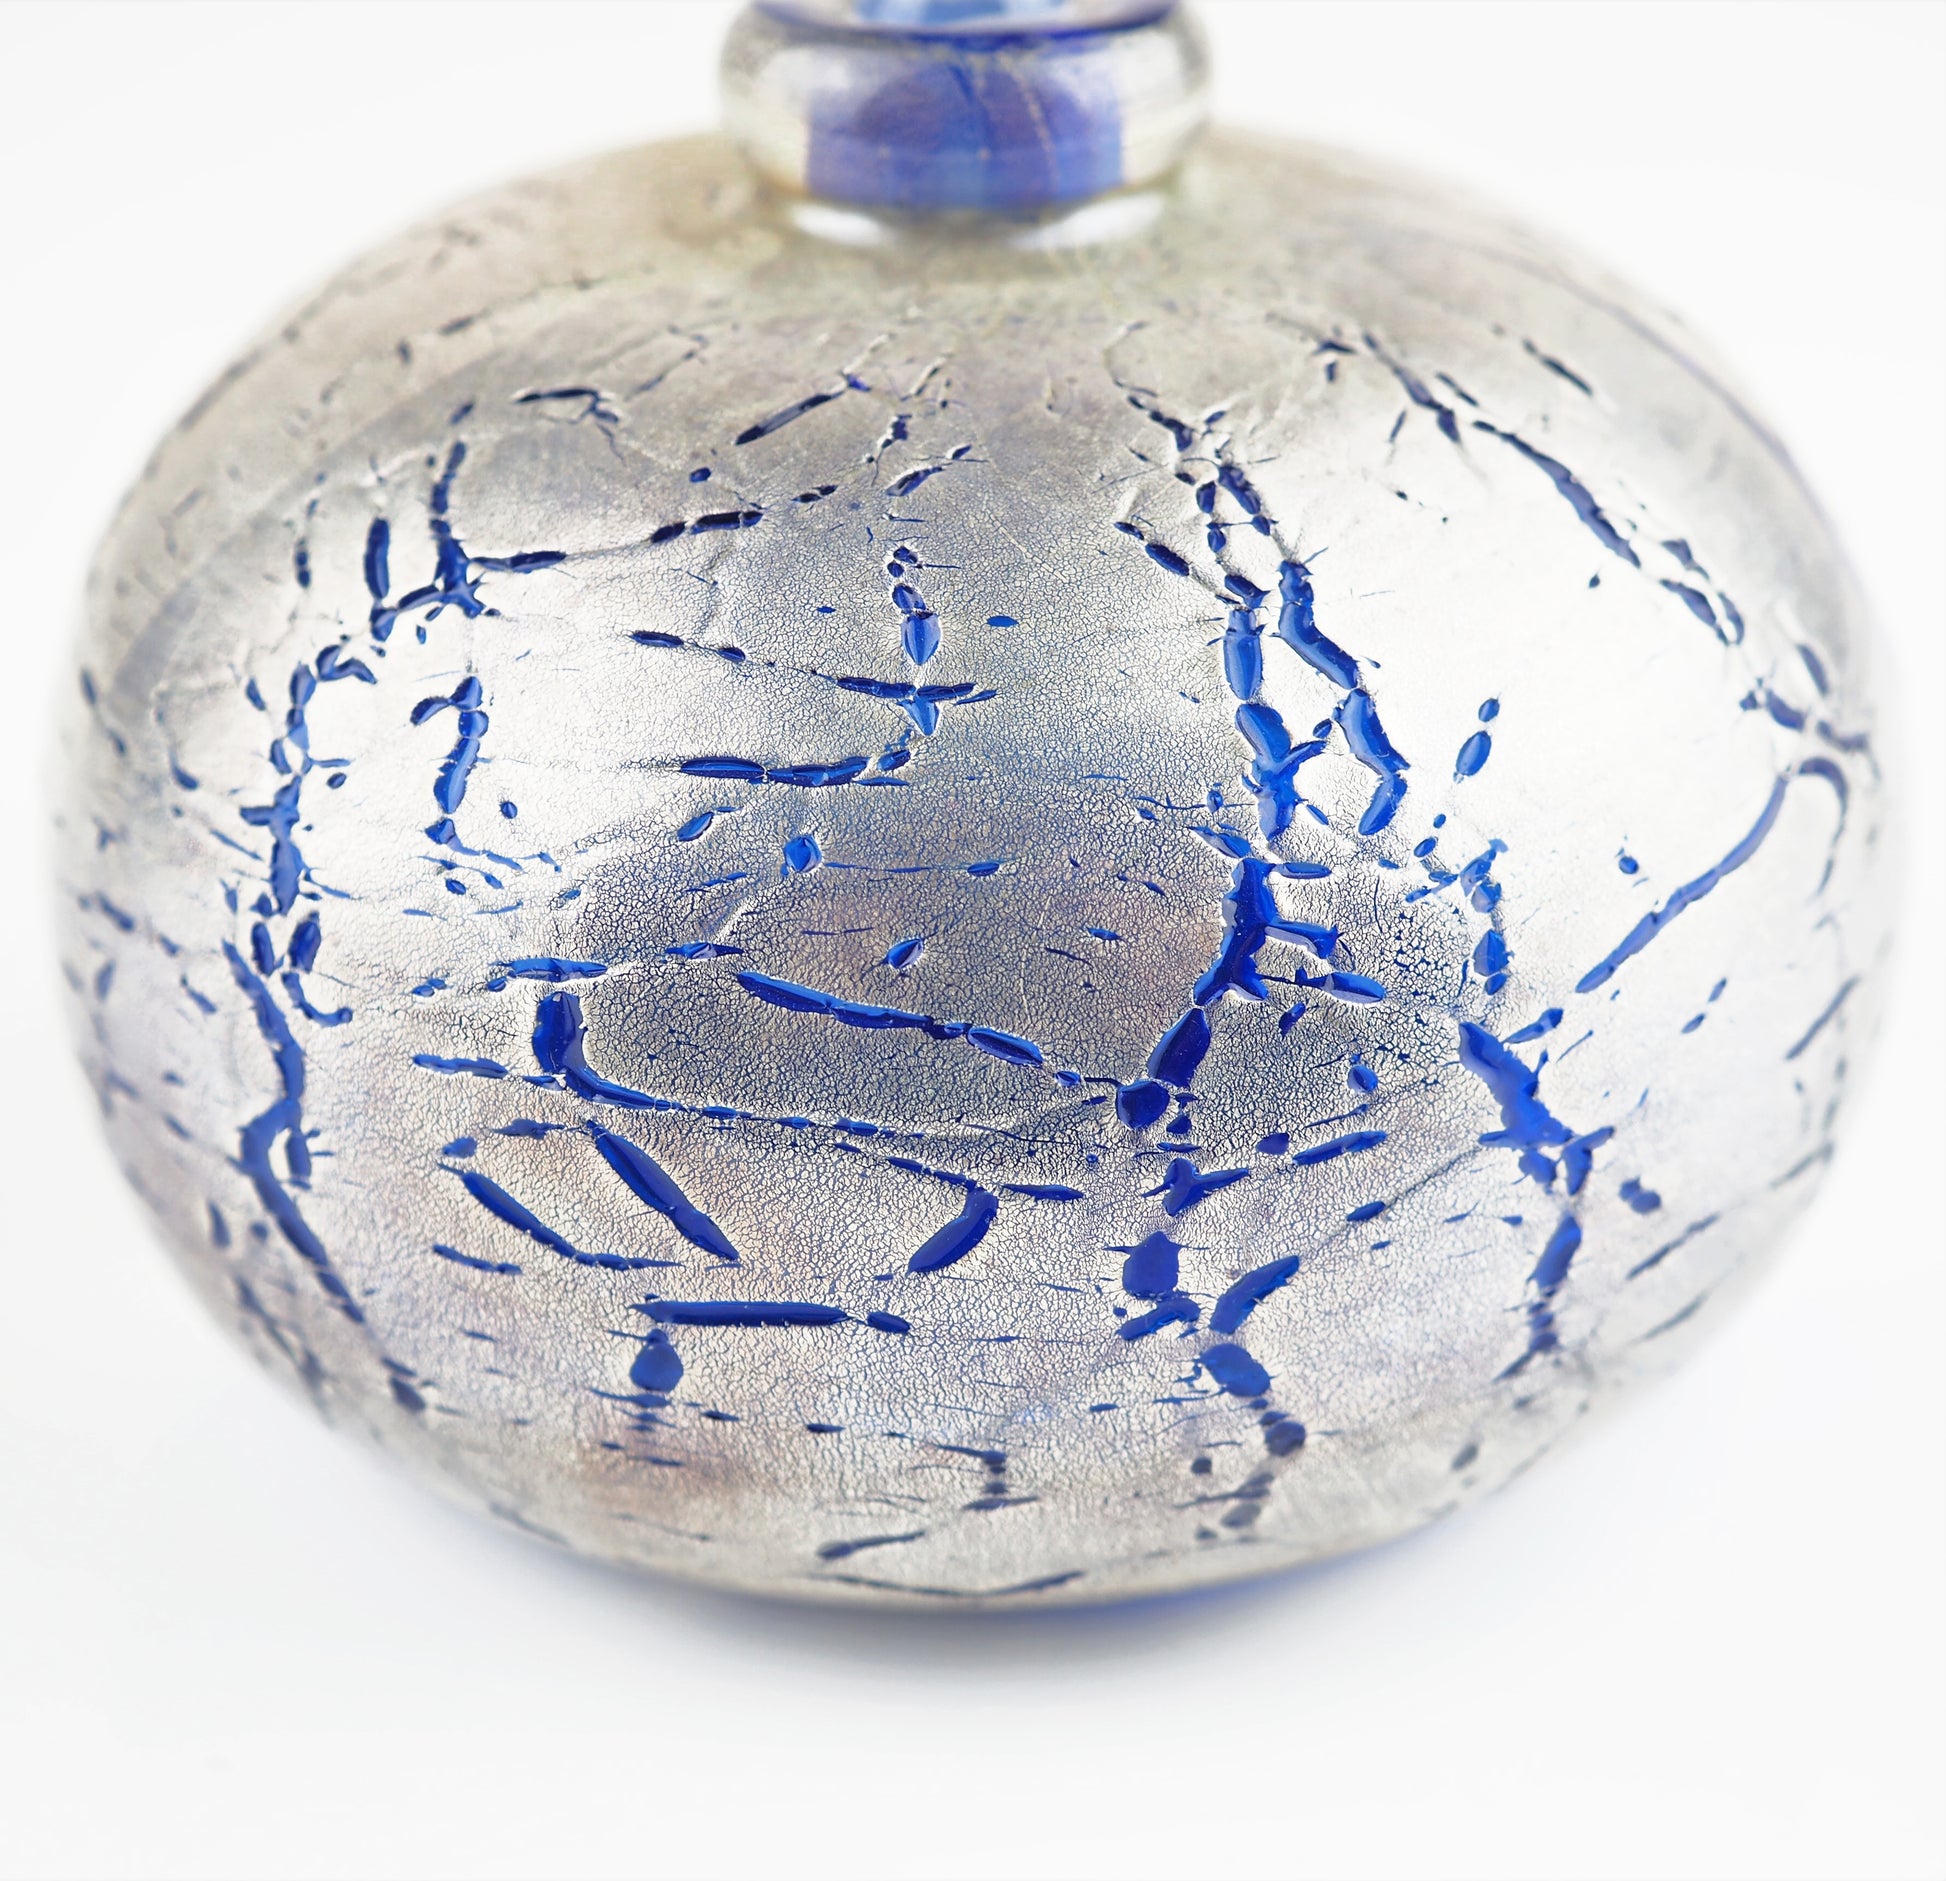 Carcass, James – Blue Stoppered Scent Bottle | James Carcass | Primavera Gallery